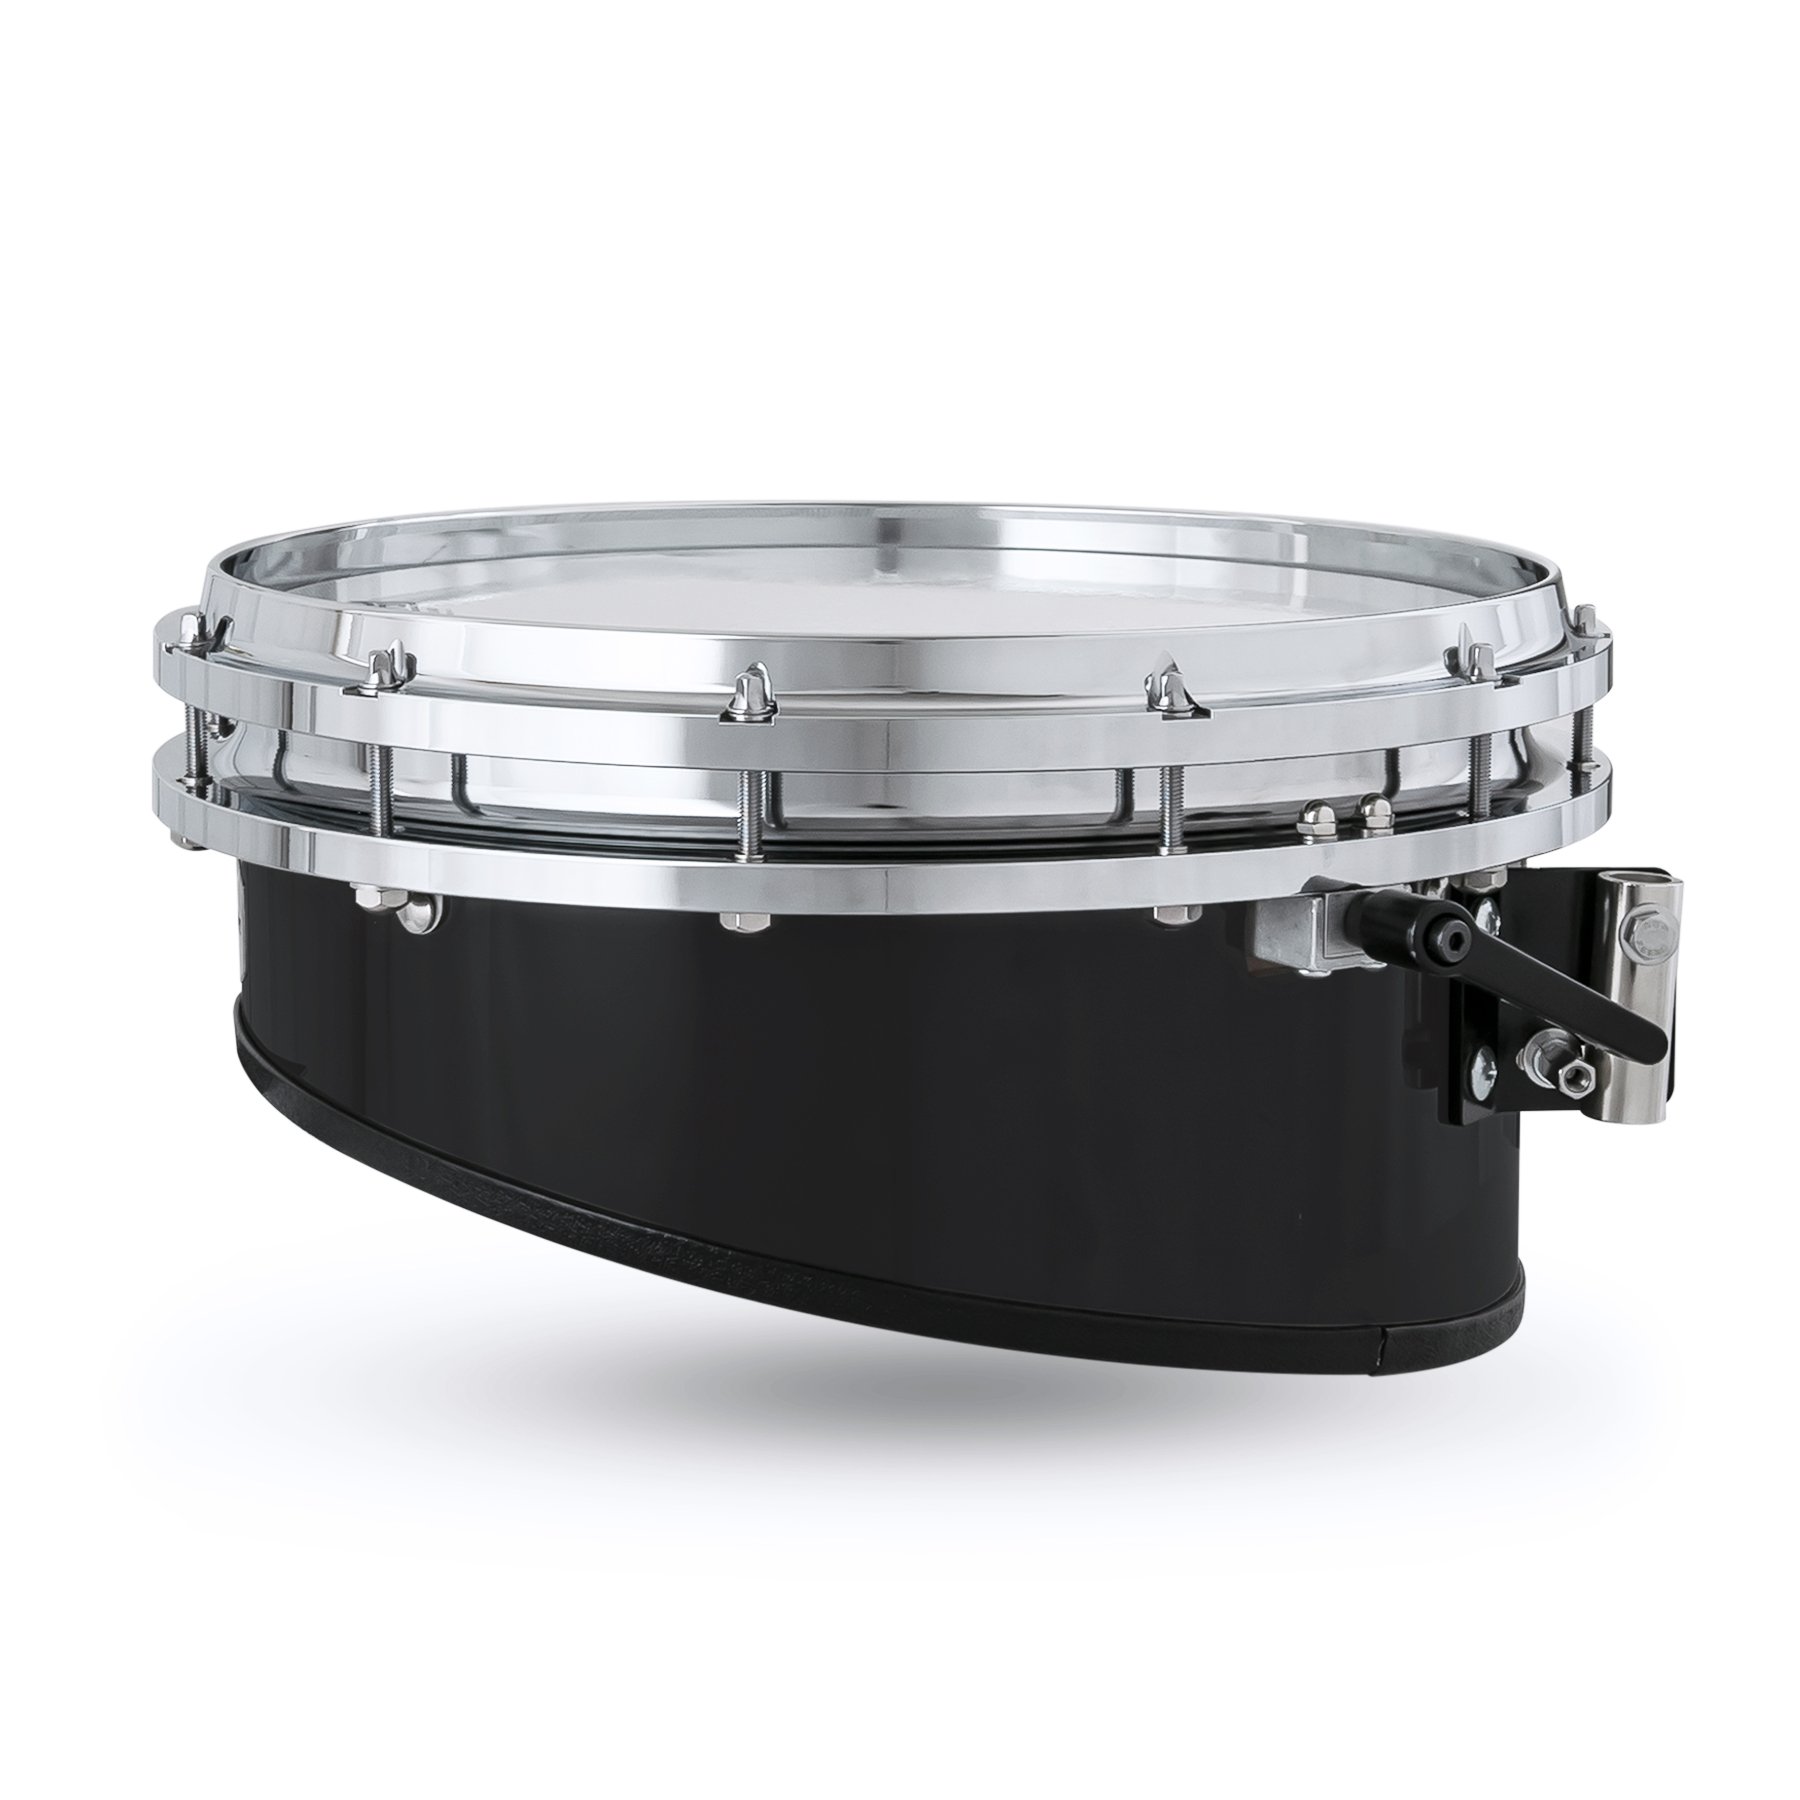 MS-W14R DFW Performance Wedge Marching Snare Black with Shadow 2.jpg